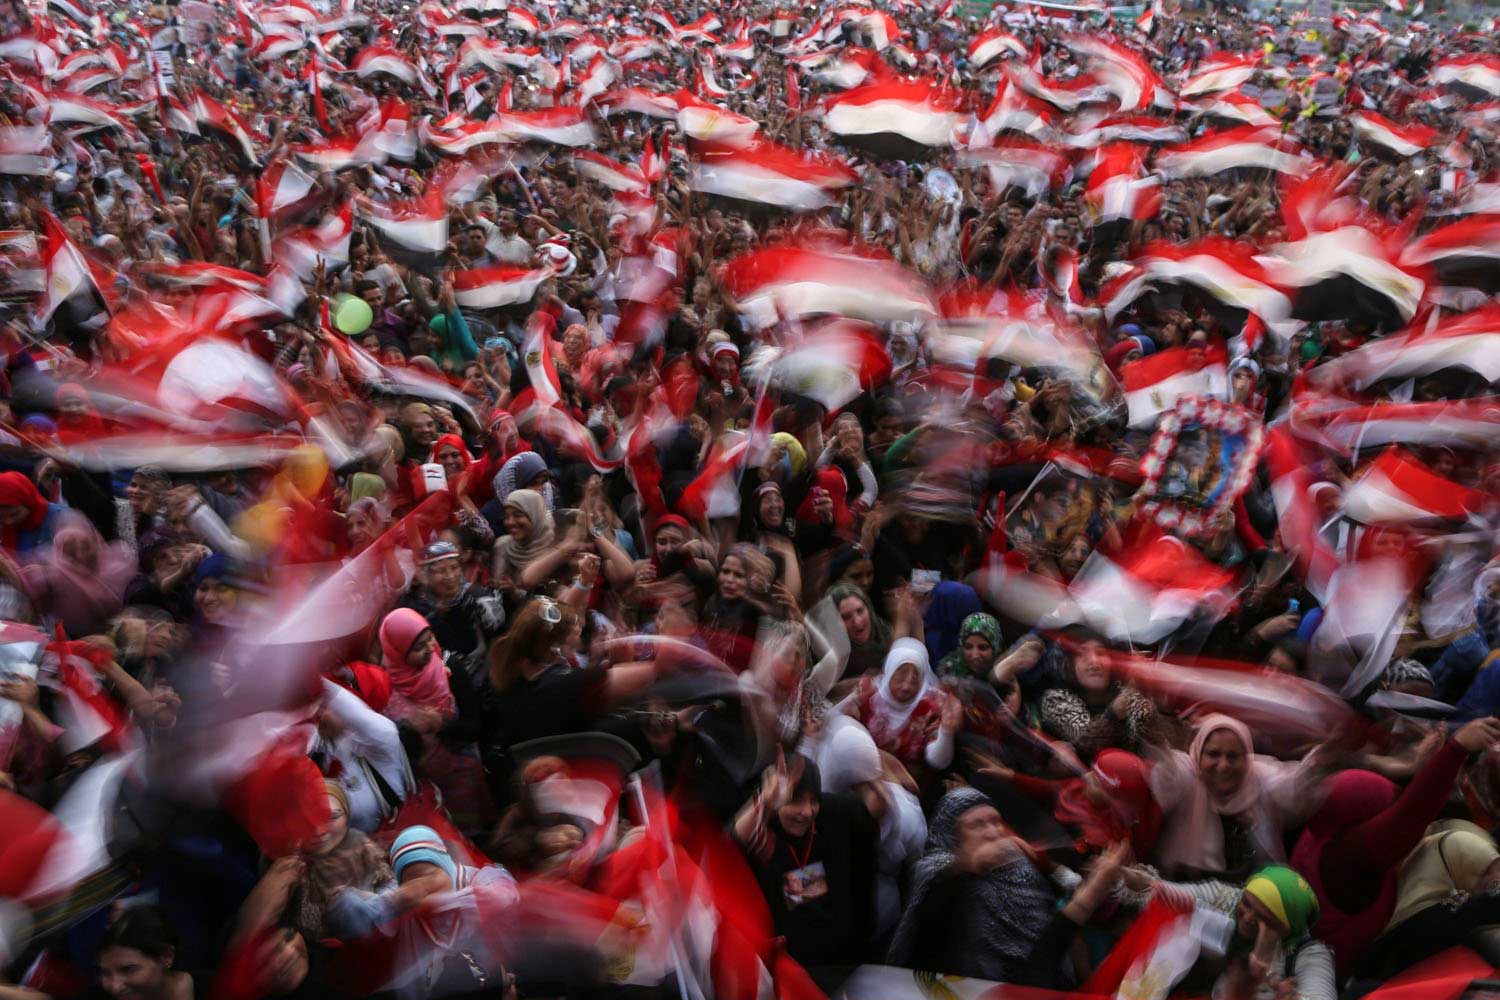 Egyptians wave national flags as they celebrate in Cairo's Tahrir Square on June 3, 2014 after ex-army chief Abdel Fattah al-Sisi won 96.9 percent of votes in Egypt's presidential election.